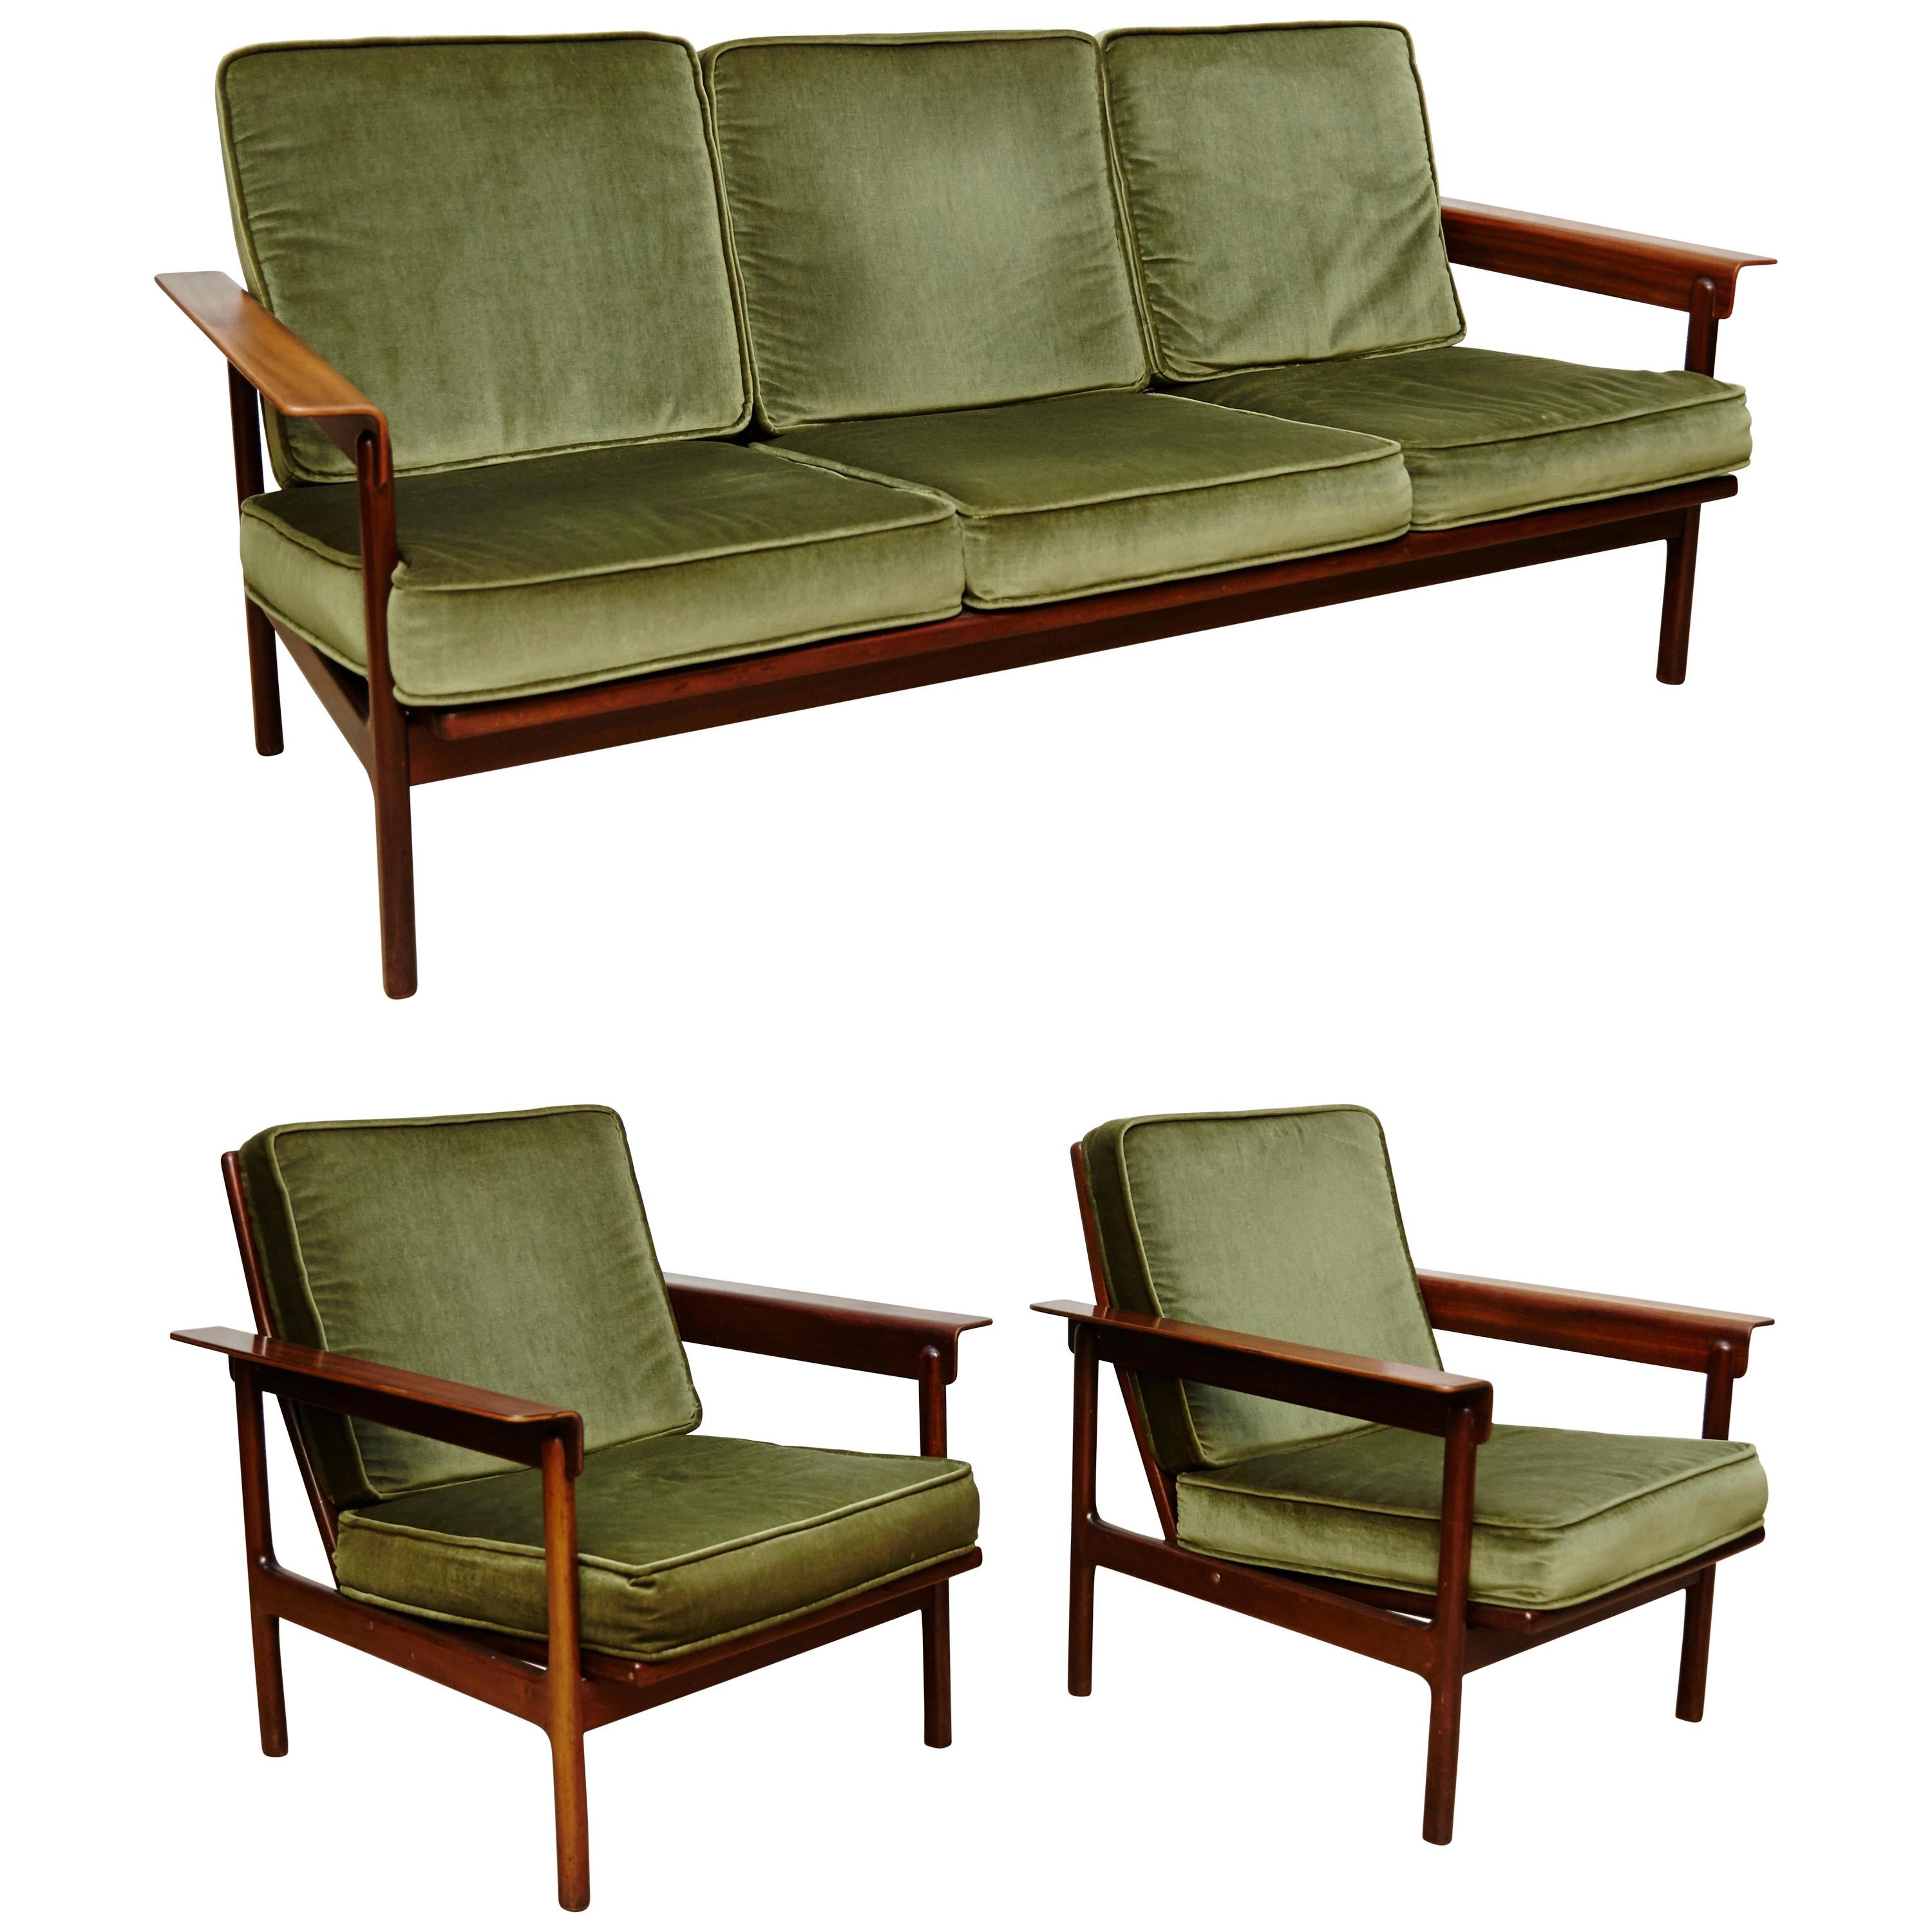 Set of Teak Wood Two Easy Chairs, circa 1960